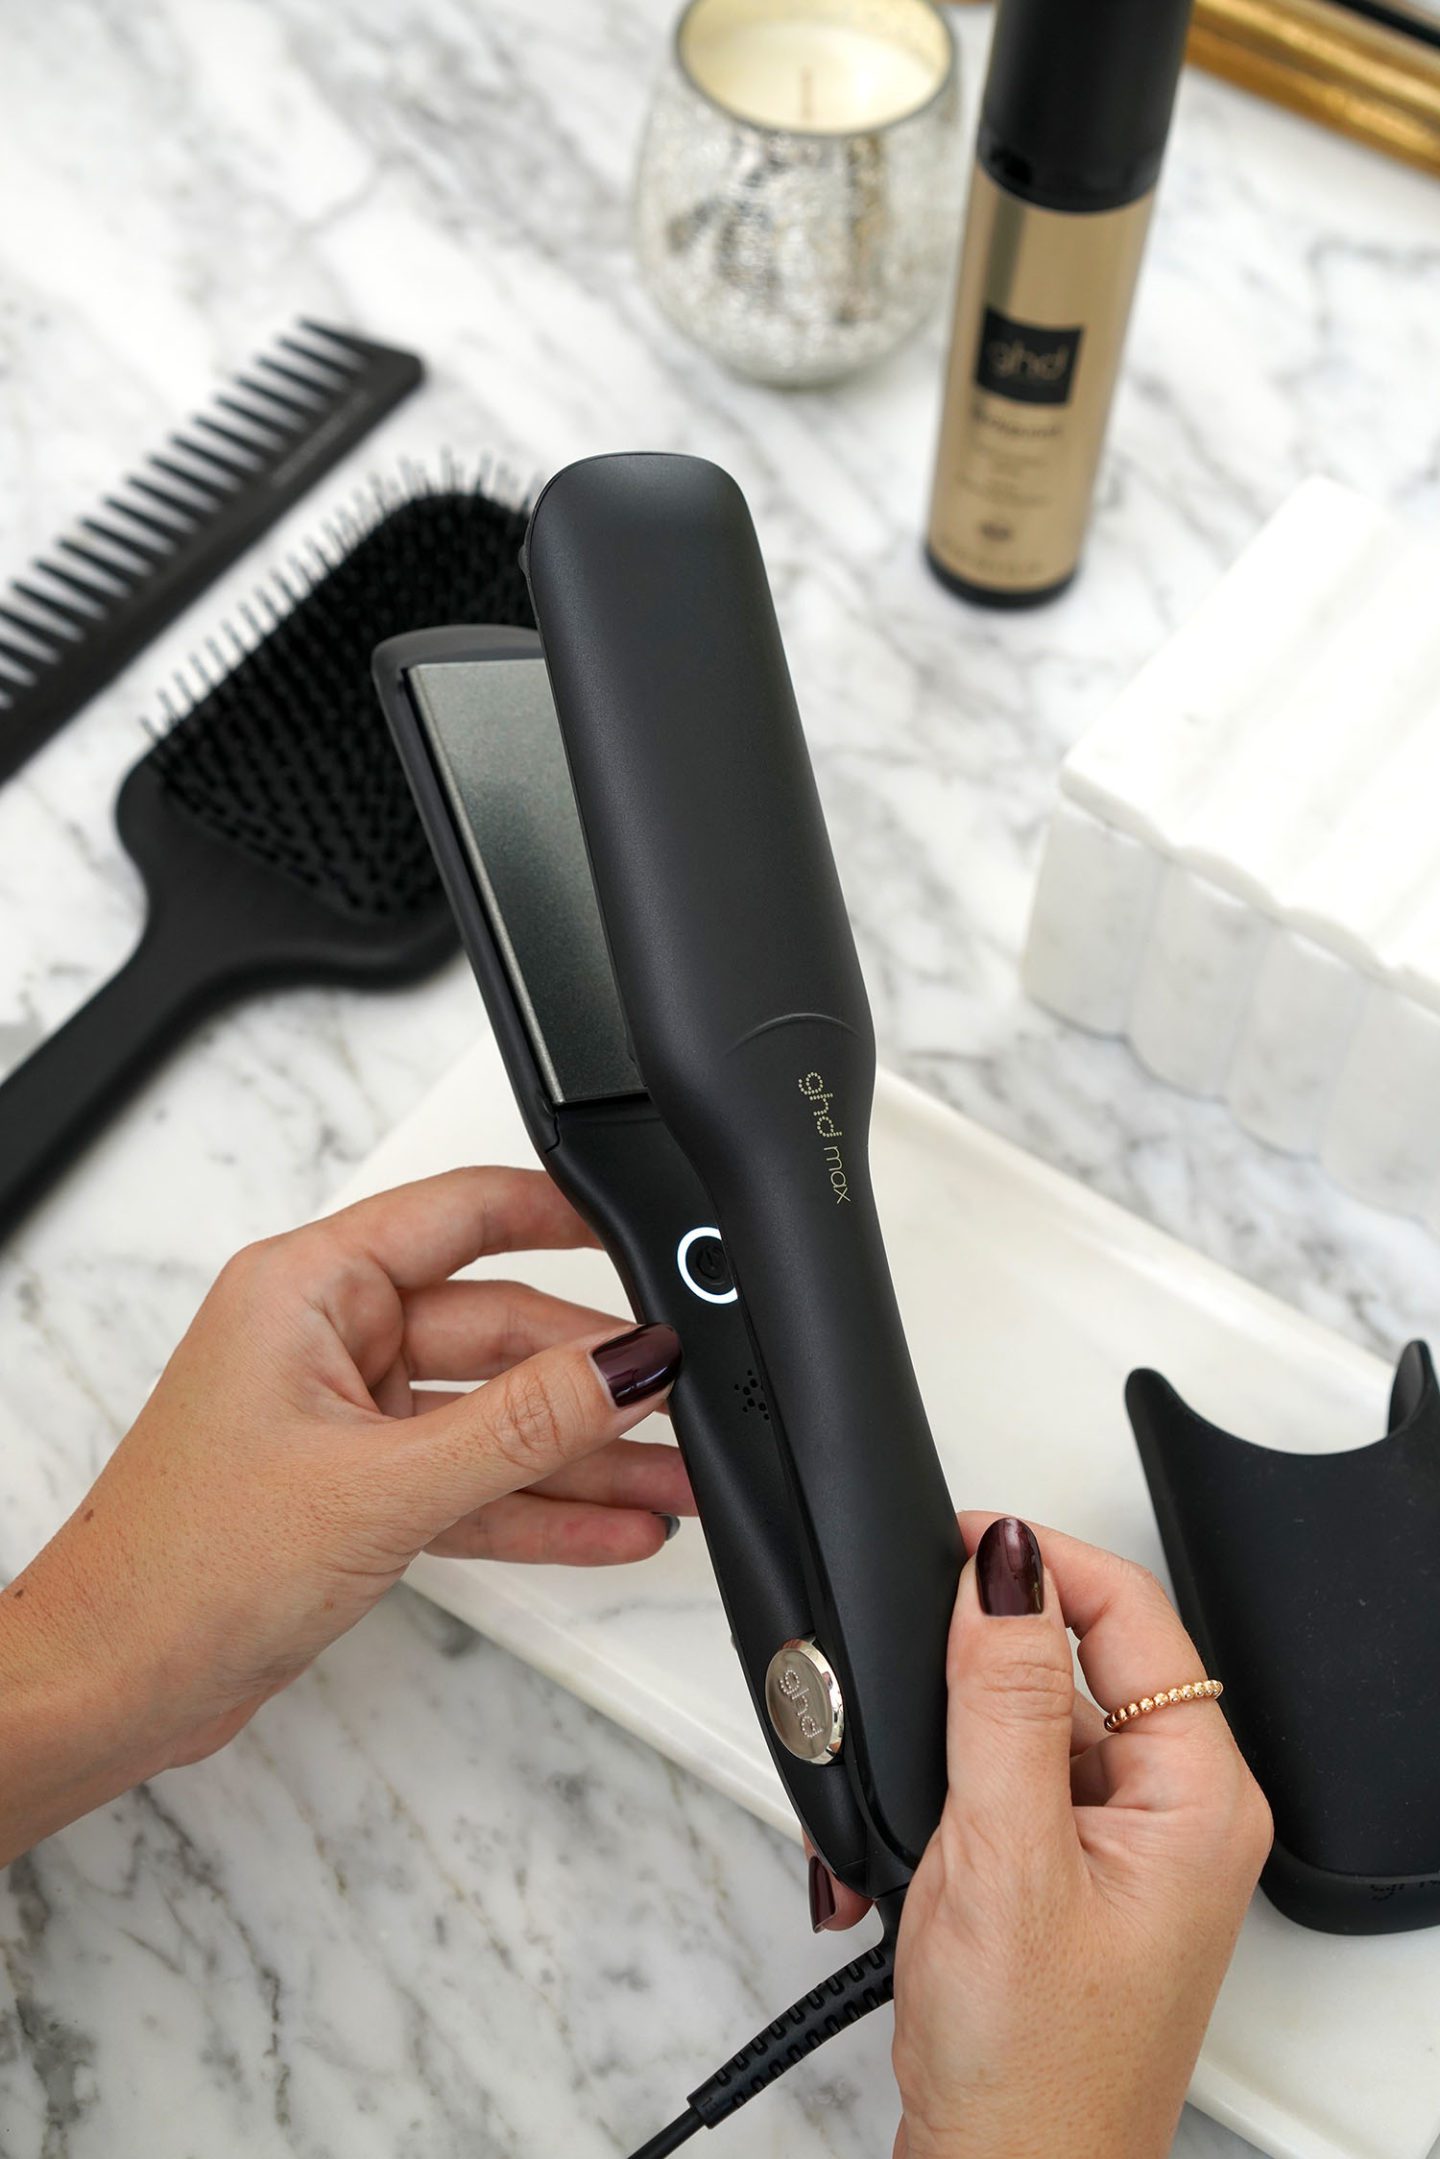 ghd Max Styler review - wide plate flat iron